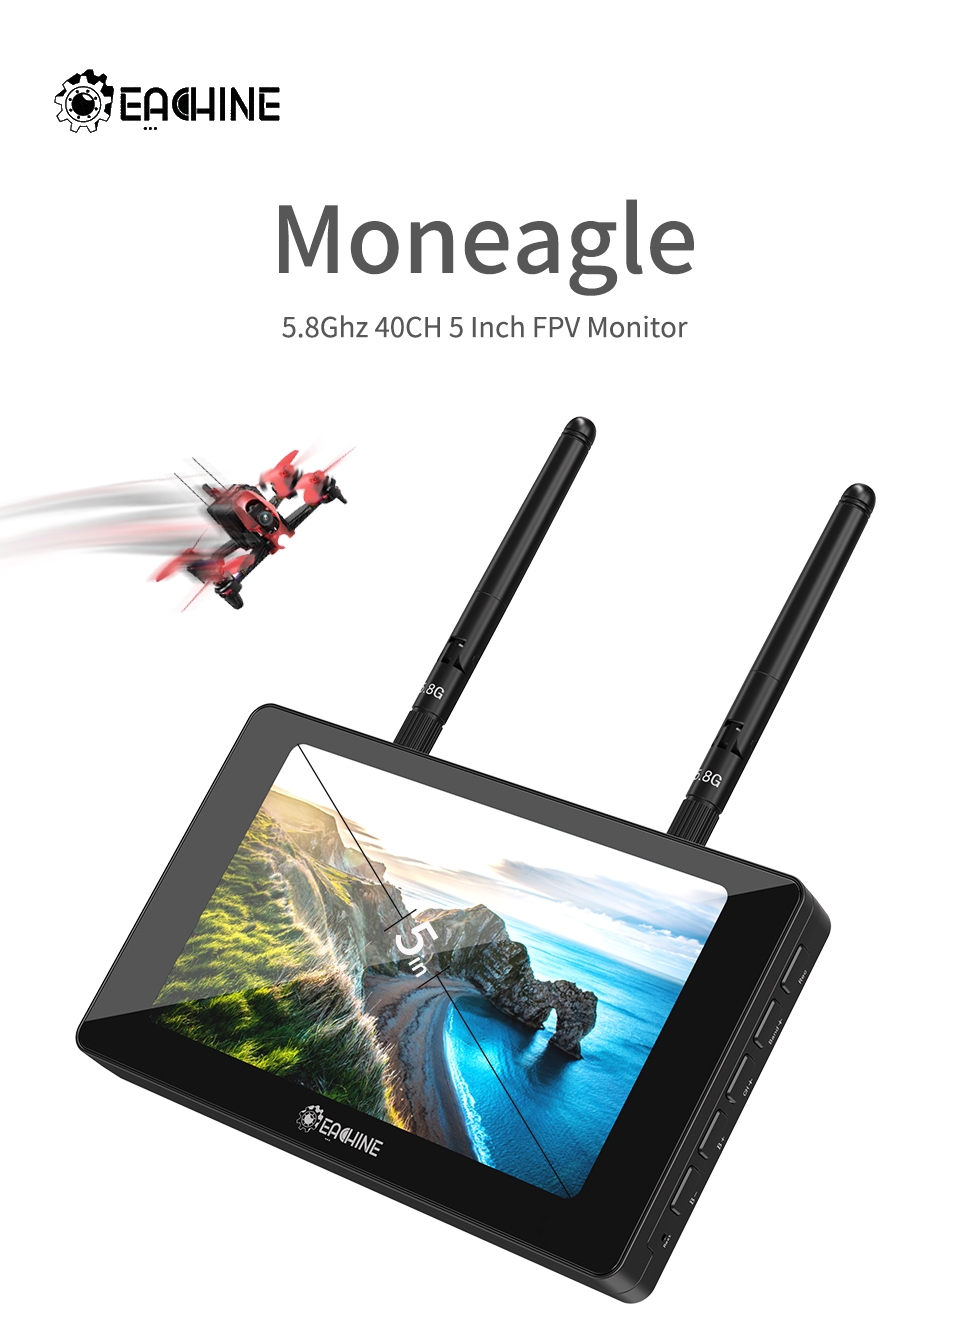 Eachine Moneagle 5 Inch IPS 800x480 5.8GHz 40CH Diversity Receiver 1000Lux FPV Monitor With DVR 360° Full View HD Display Built-in 4000mAh Battery For RC Drone Radio Controller